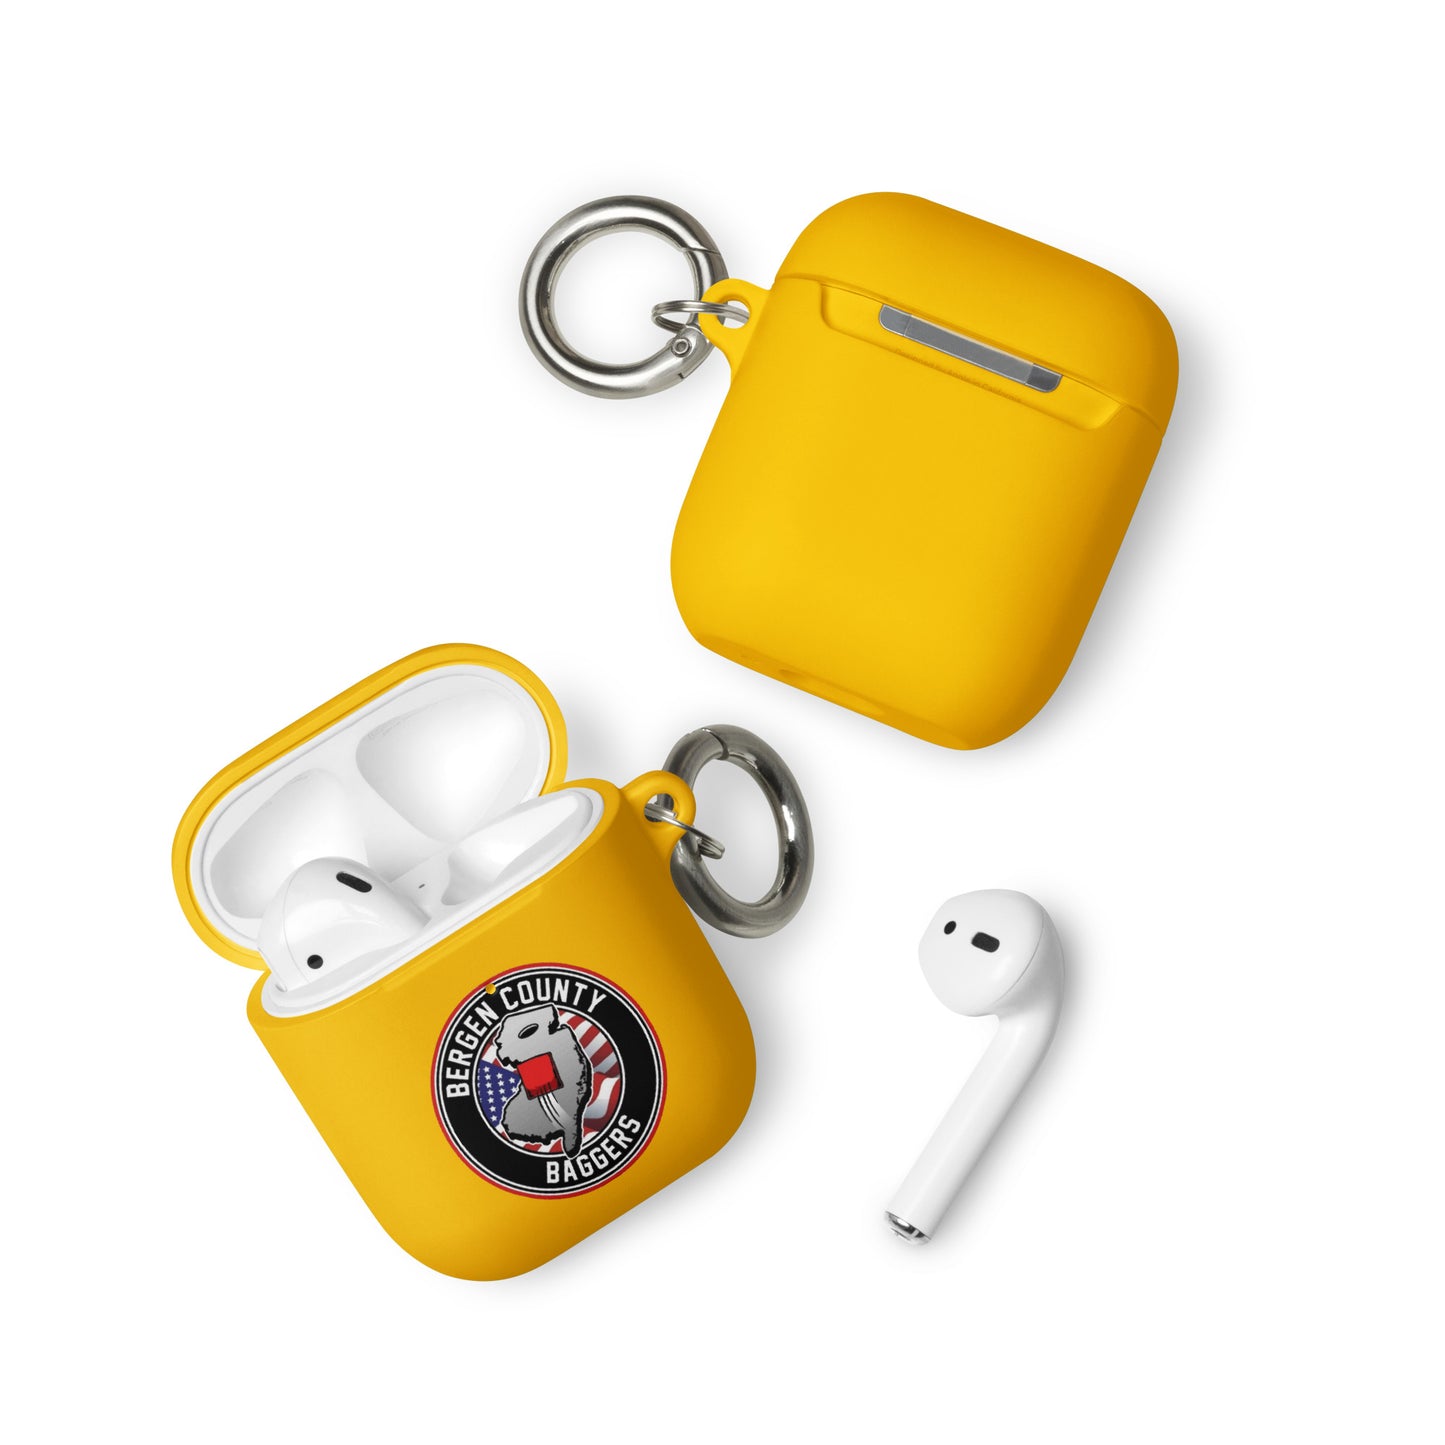 Bergen County Baggers AirPods case